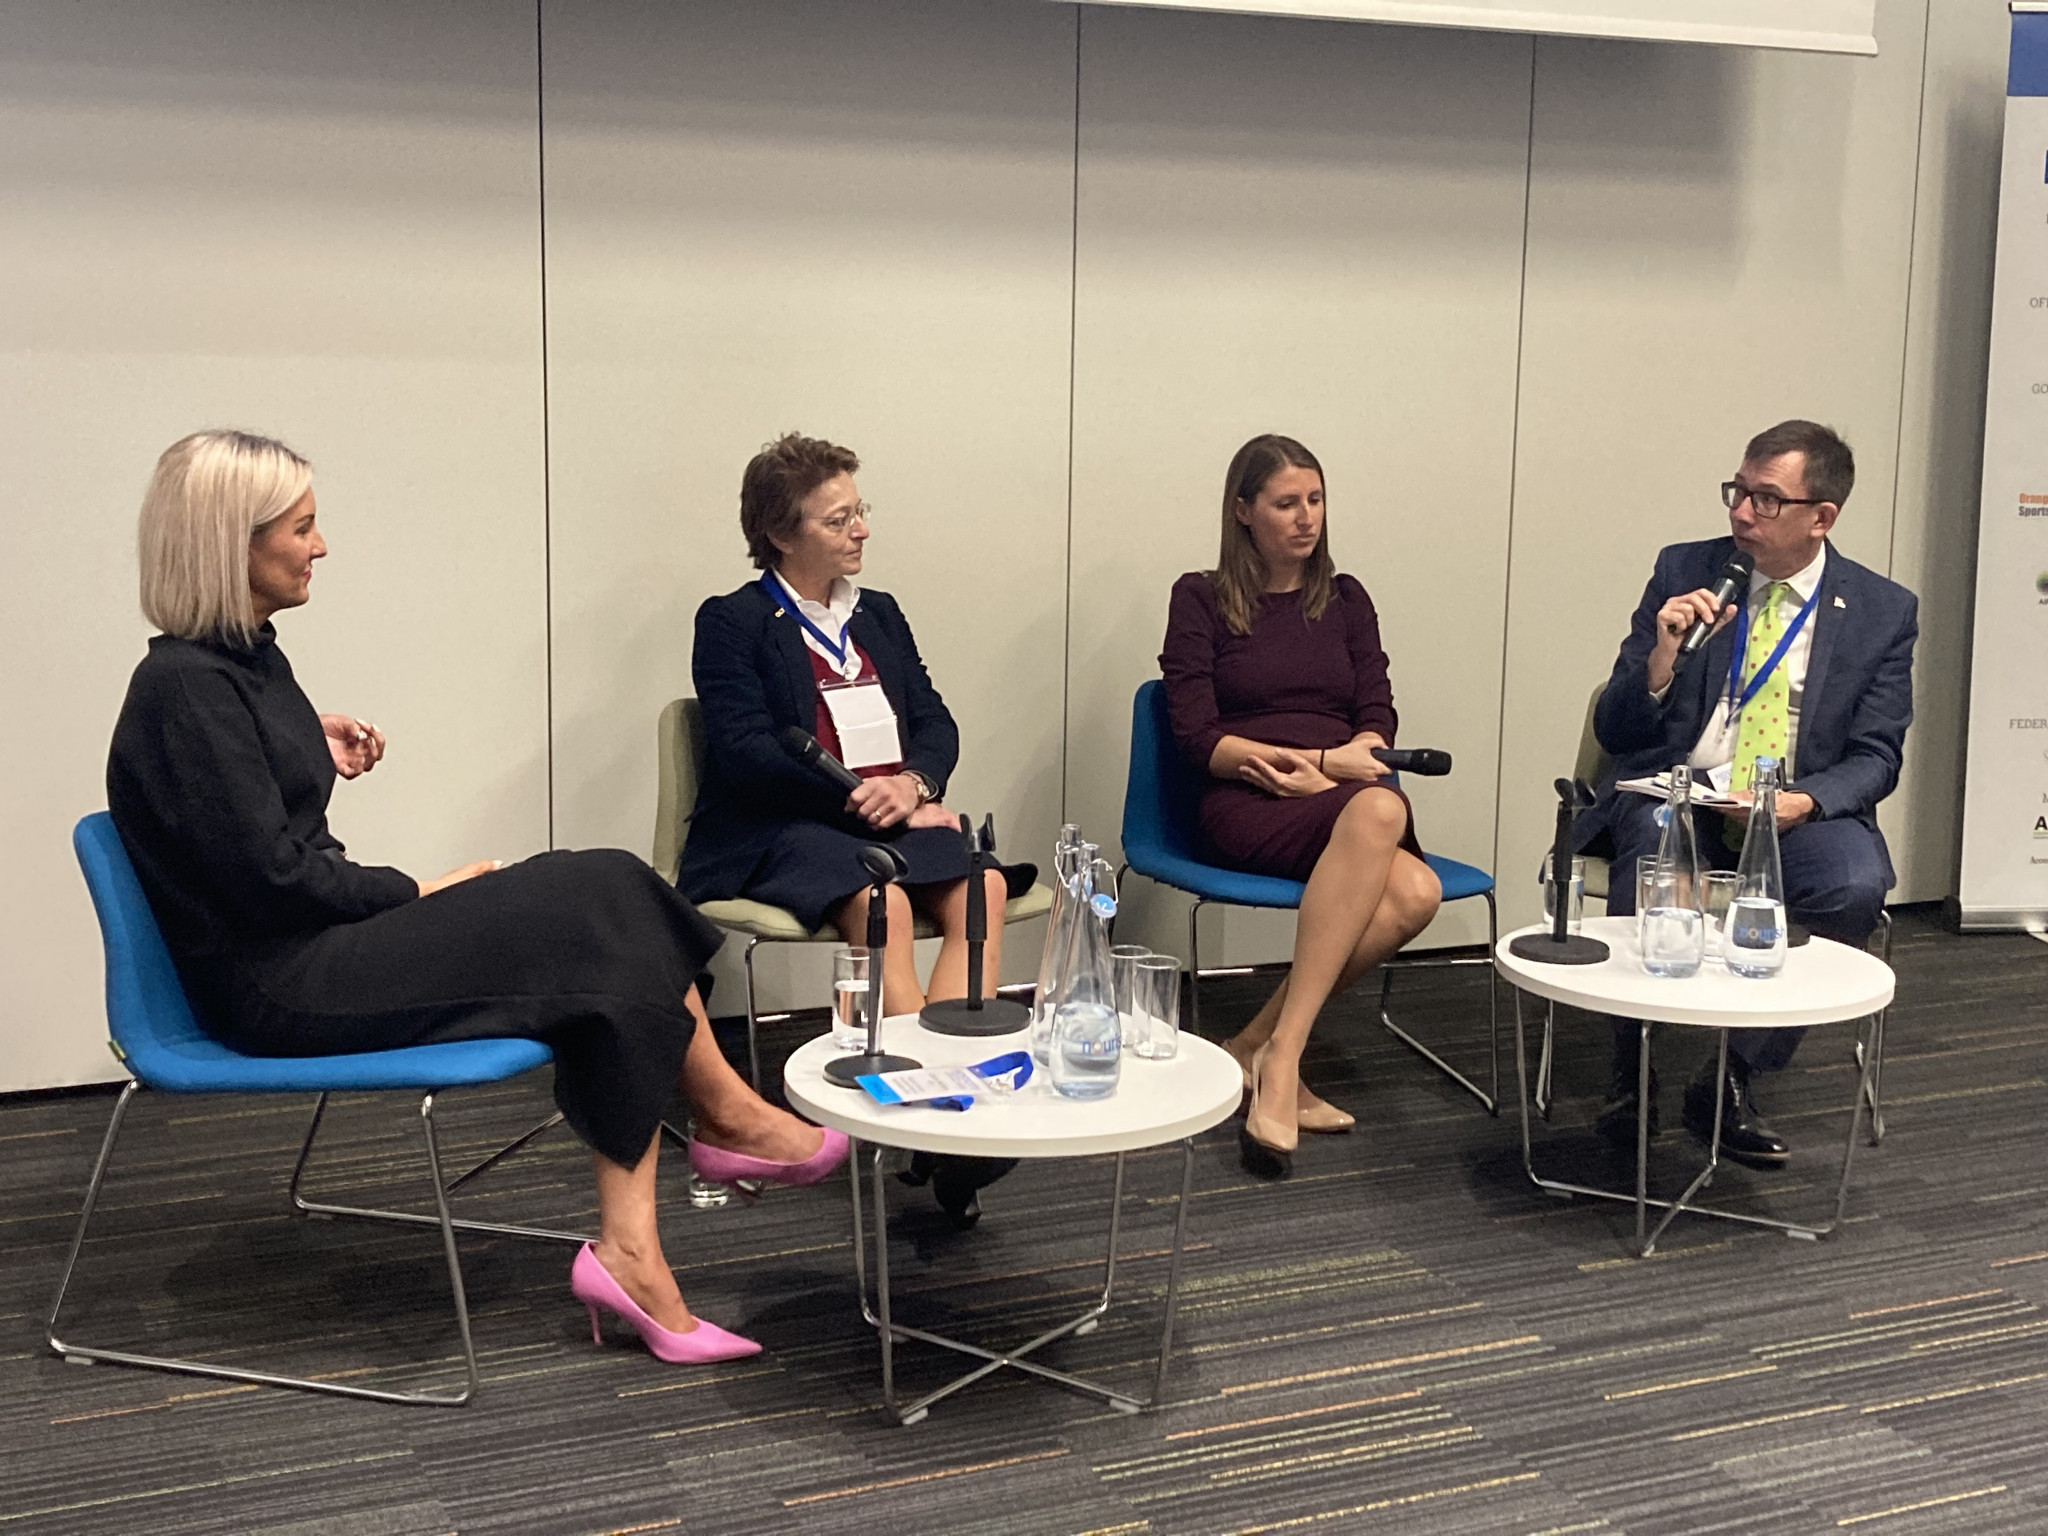 insidethegames editor-in-chief Duncan Mackay, furthest right, moderated the panel discussion on the rise of women's sport and entertainment ©ITG